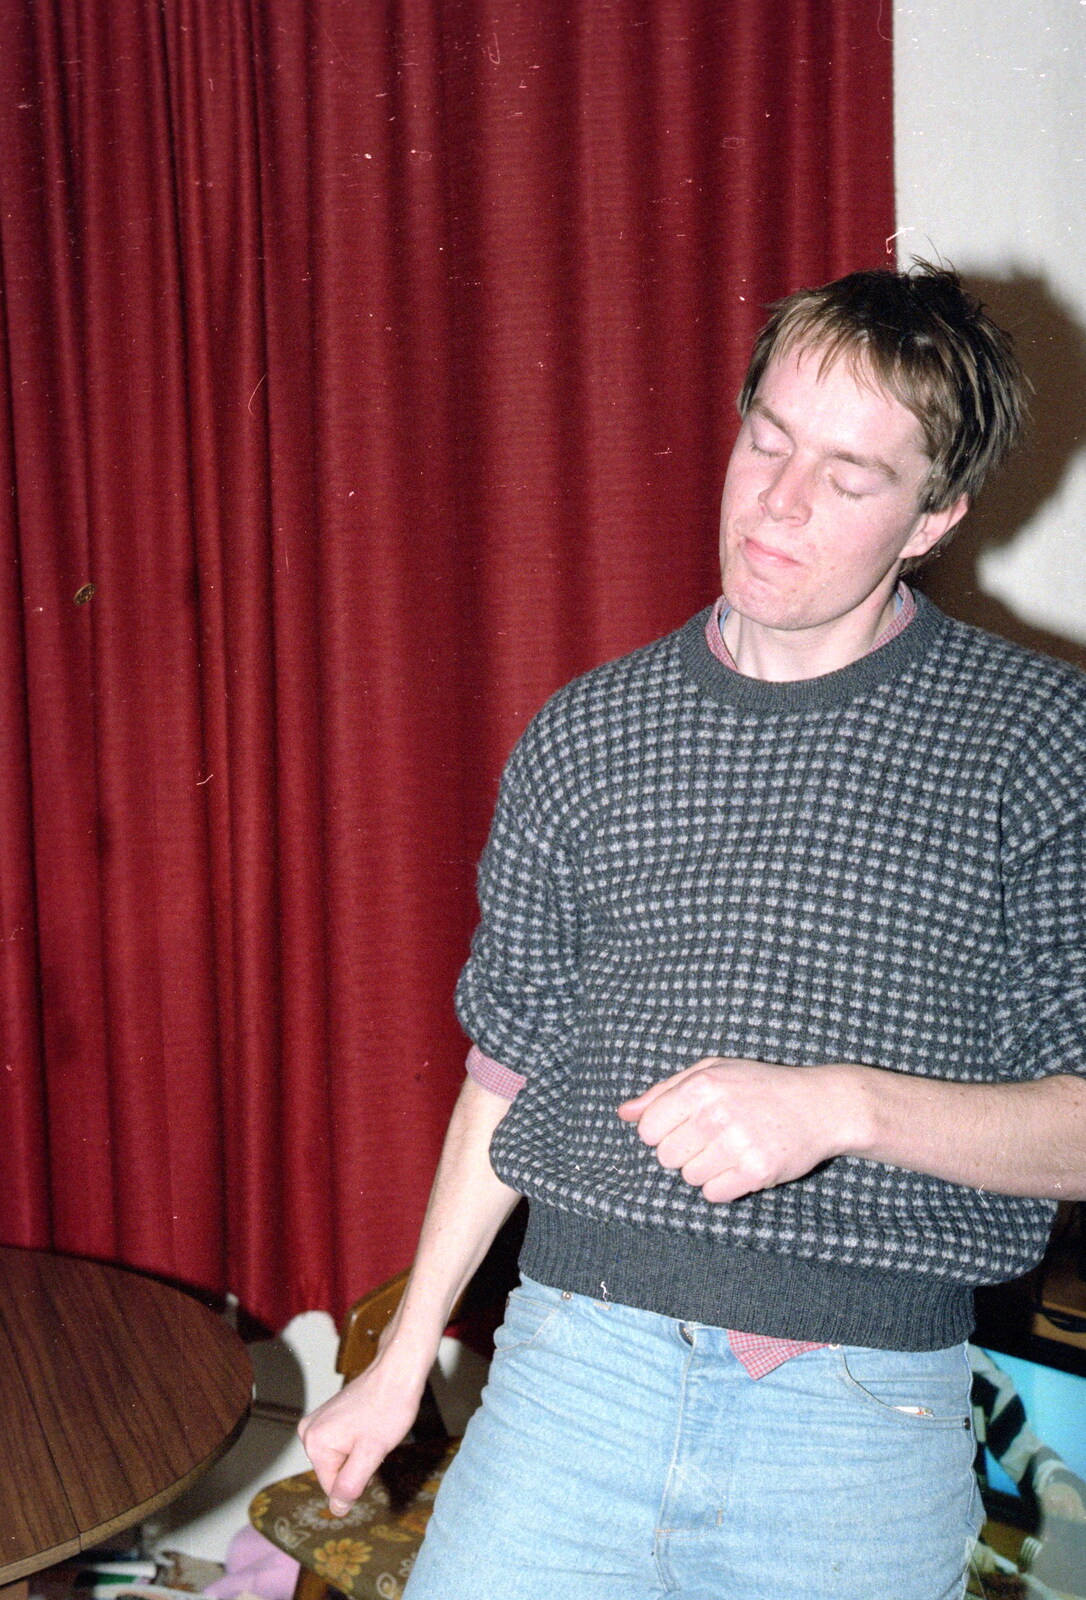 Malcolm in the lounge at Beaumont Street from Uni: RAG Week Abseil, Hitch Hike, and Beaumont Street Life Plymouth, Devon - 13th February 1986